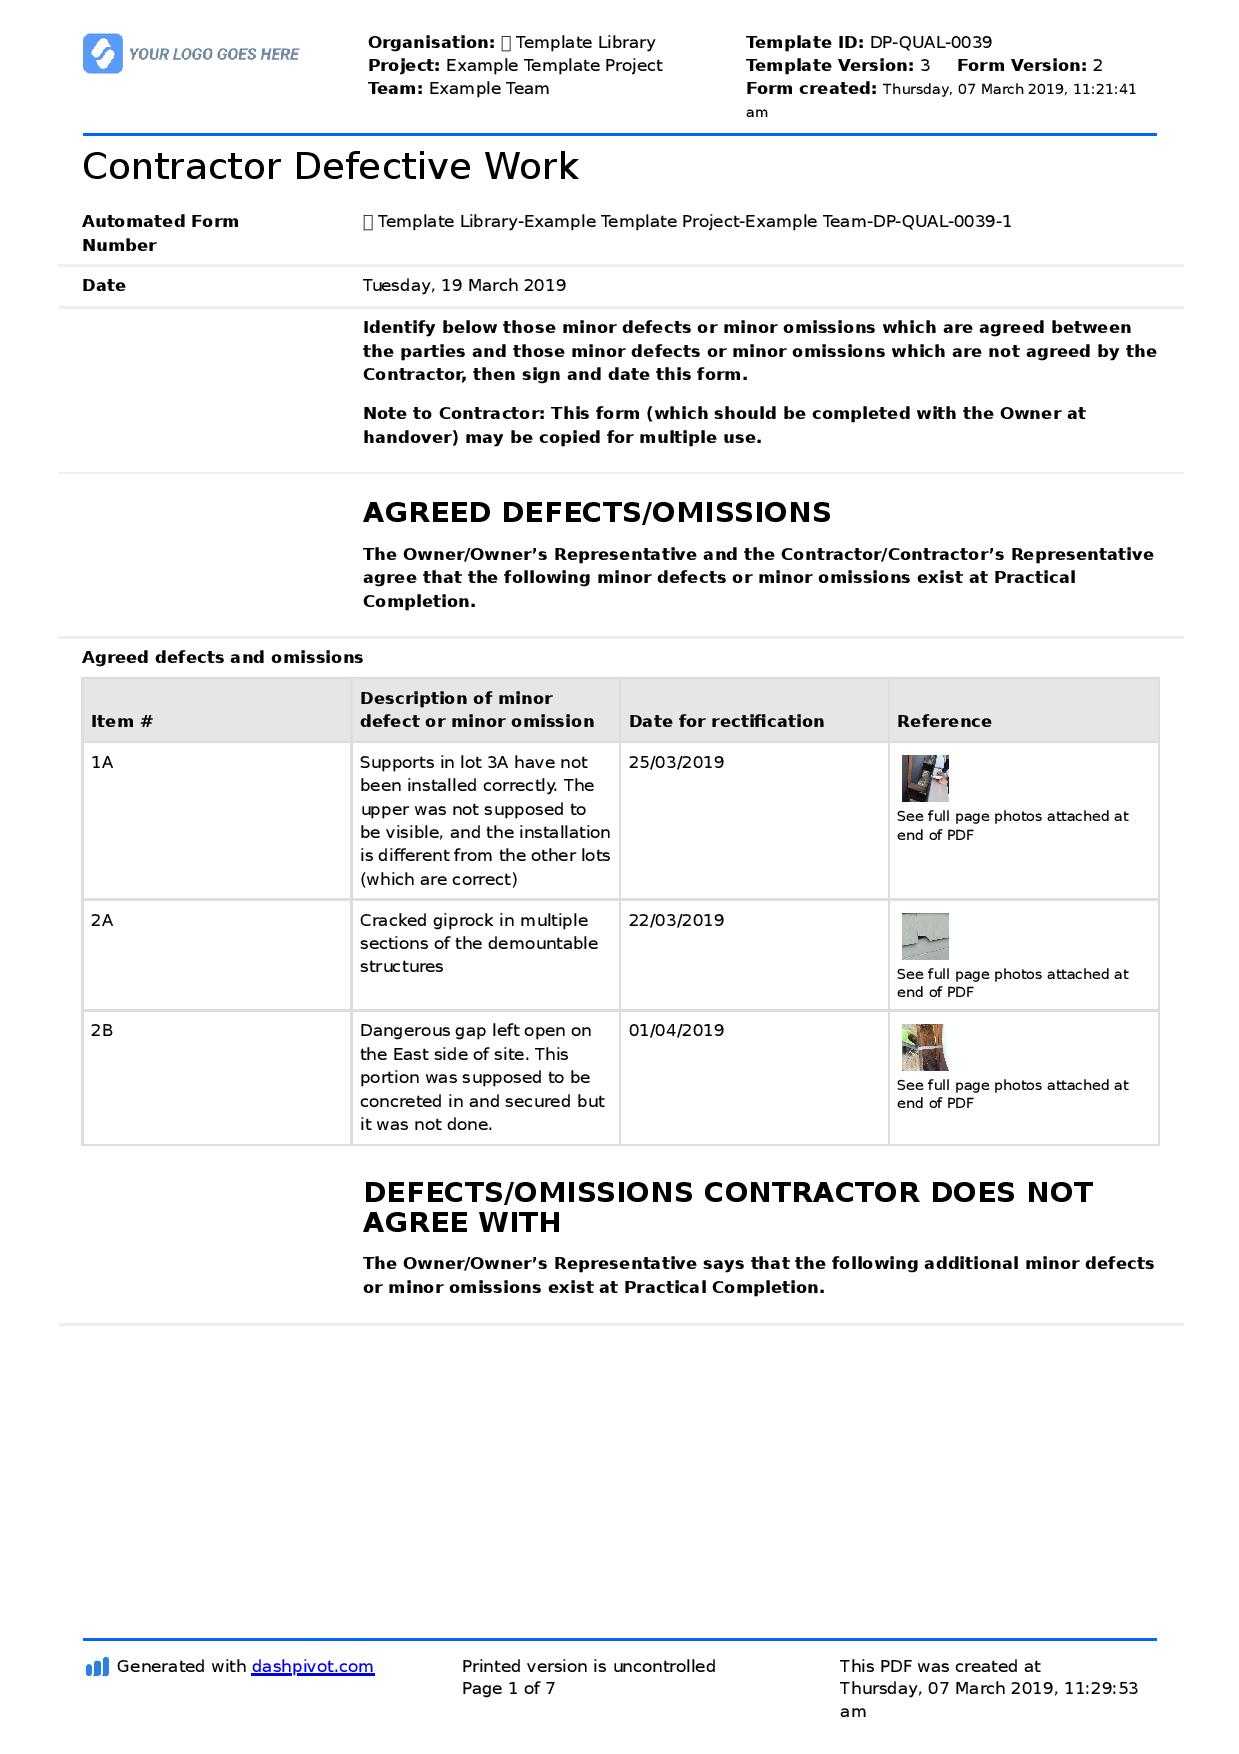 Letter To Contractor For Defective Work: Sample Letter And Throughout Building Defect Report Template